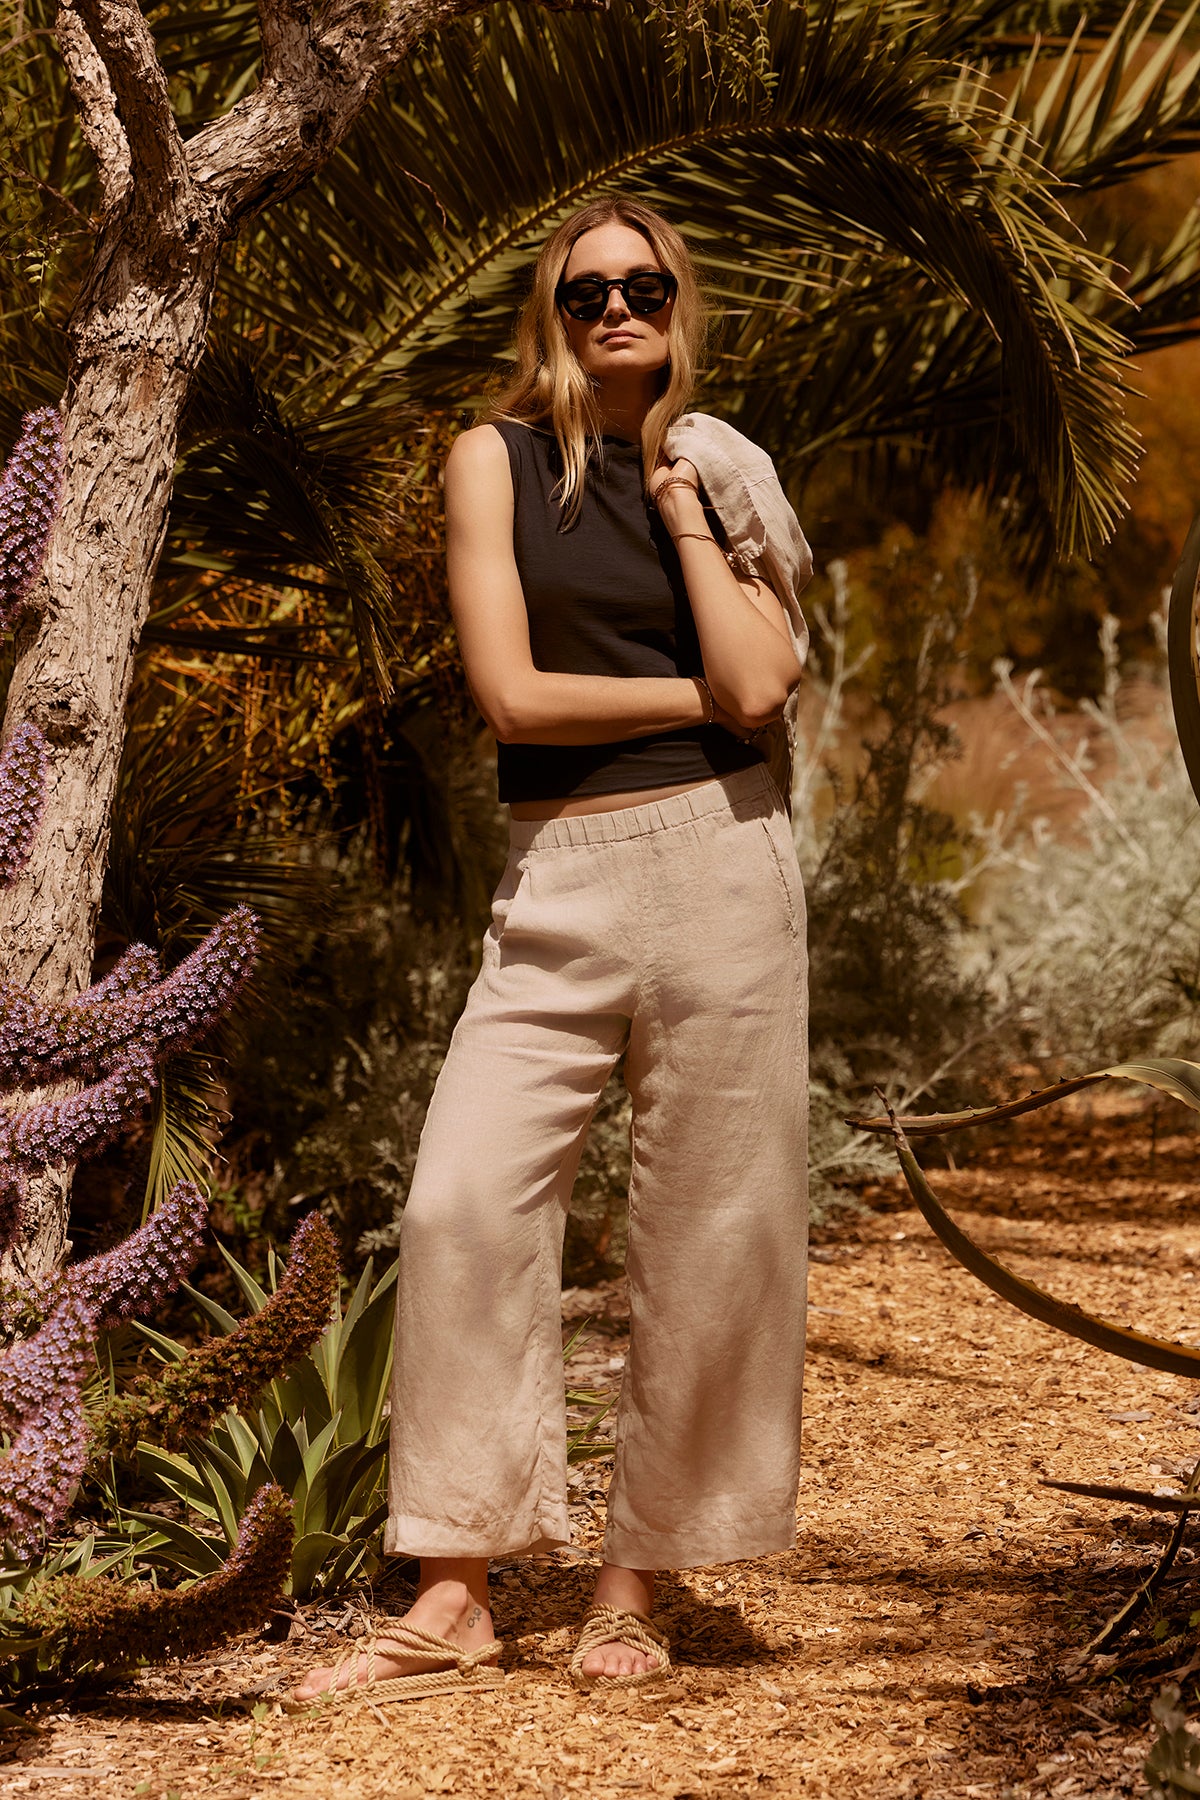 A person wearing sunglasses, a sleeveless black top, and lightweight Velvet by Graham & Spencer LOLA LINEN PANT stands on a dirt pathway surrounded by plants and trees in a sunny outdoor setting.-37000573485249